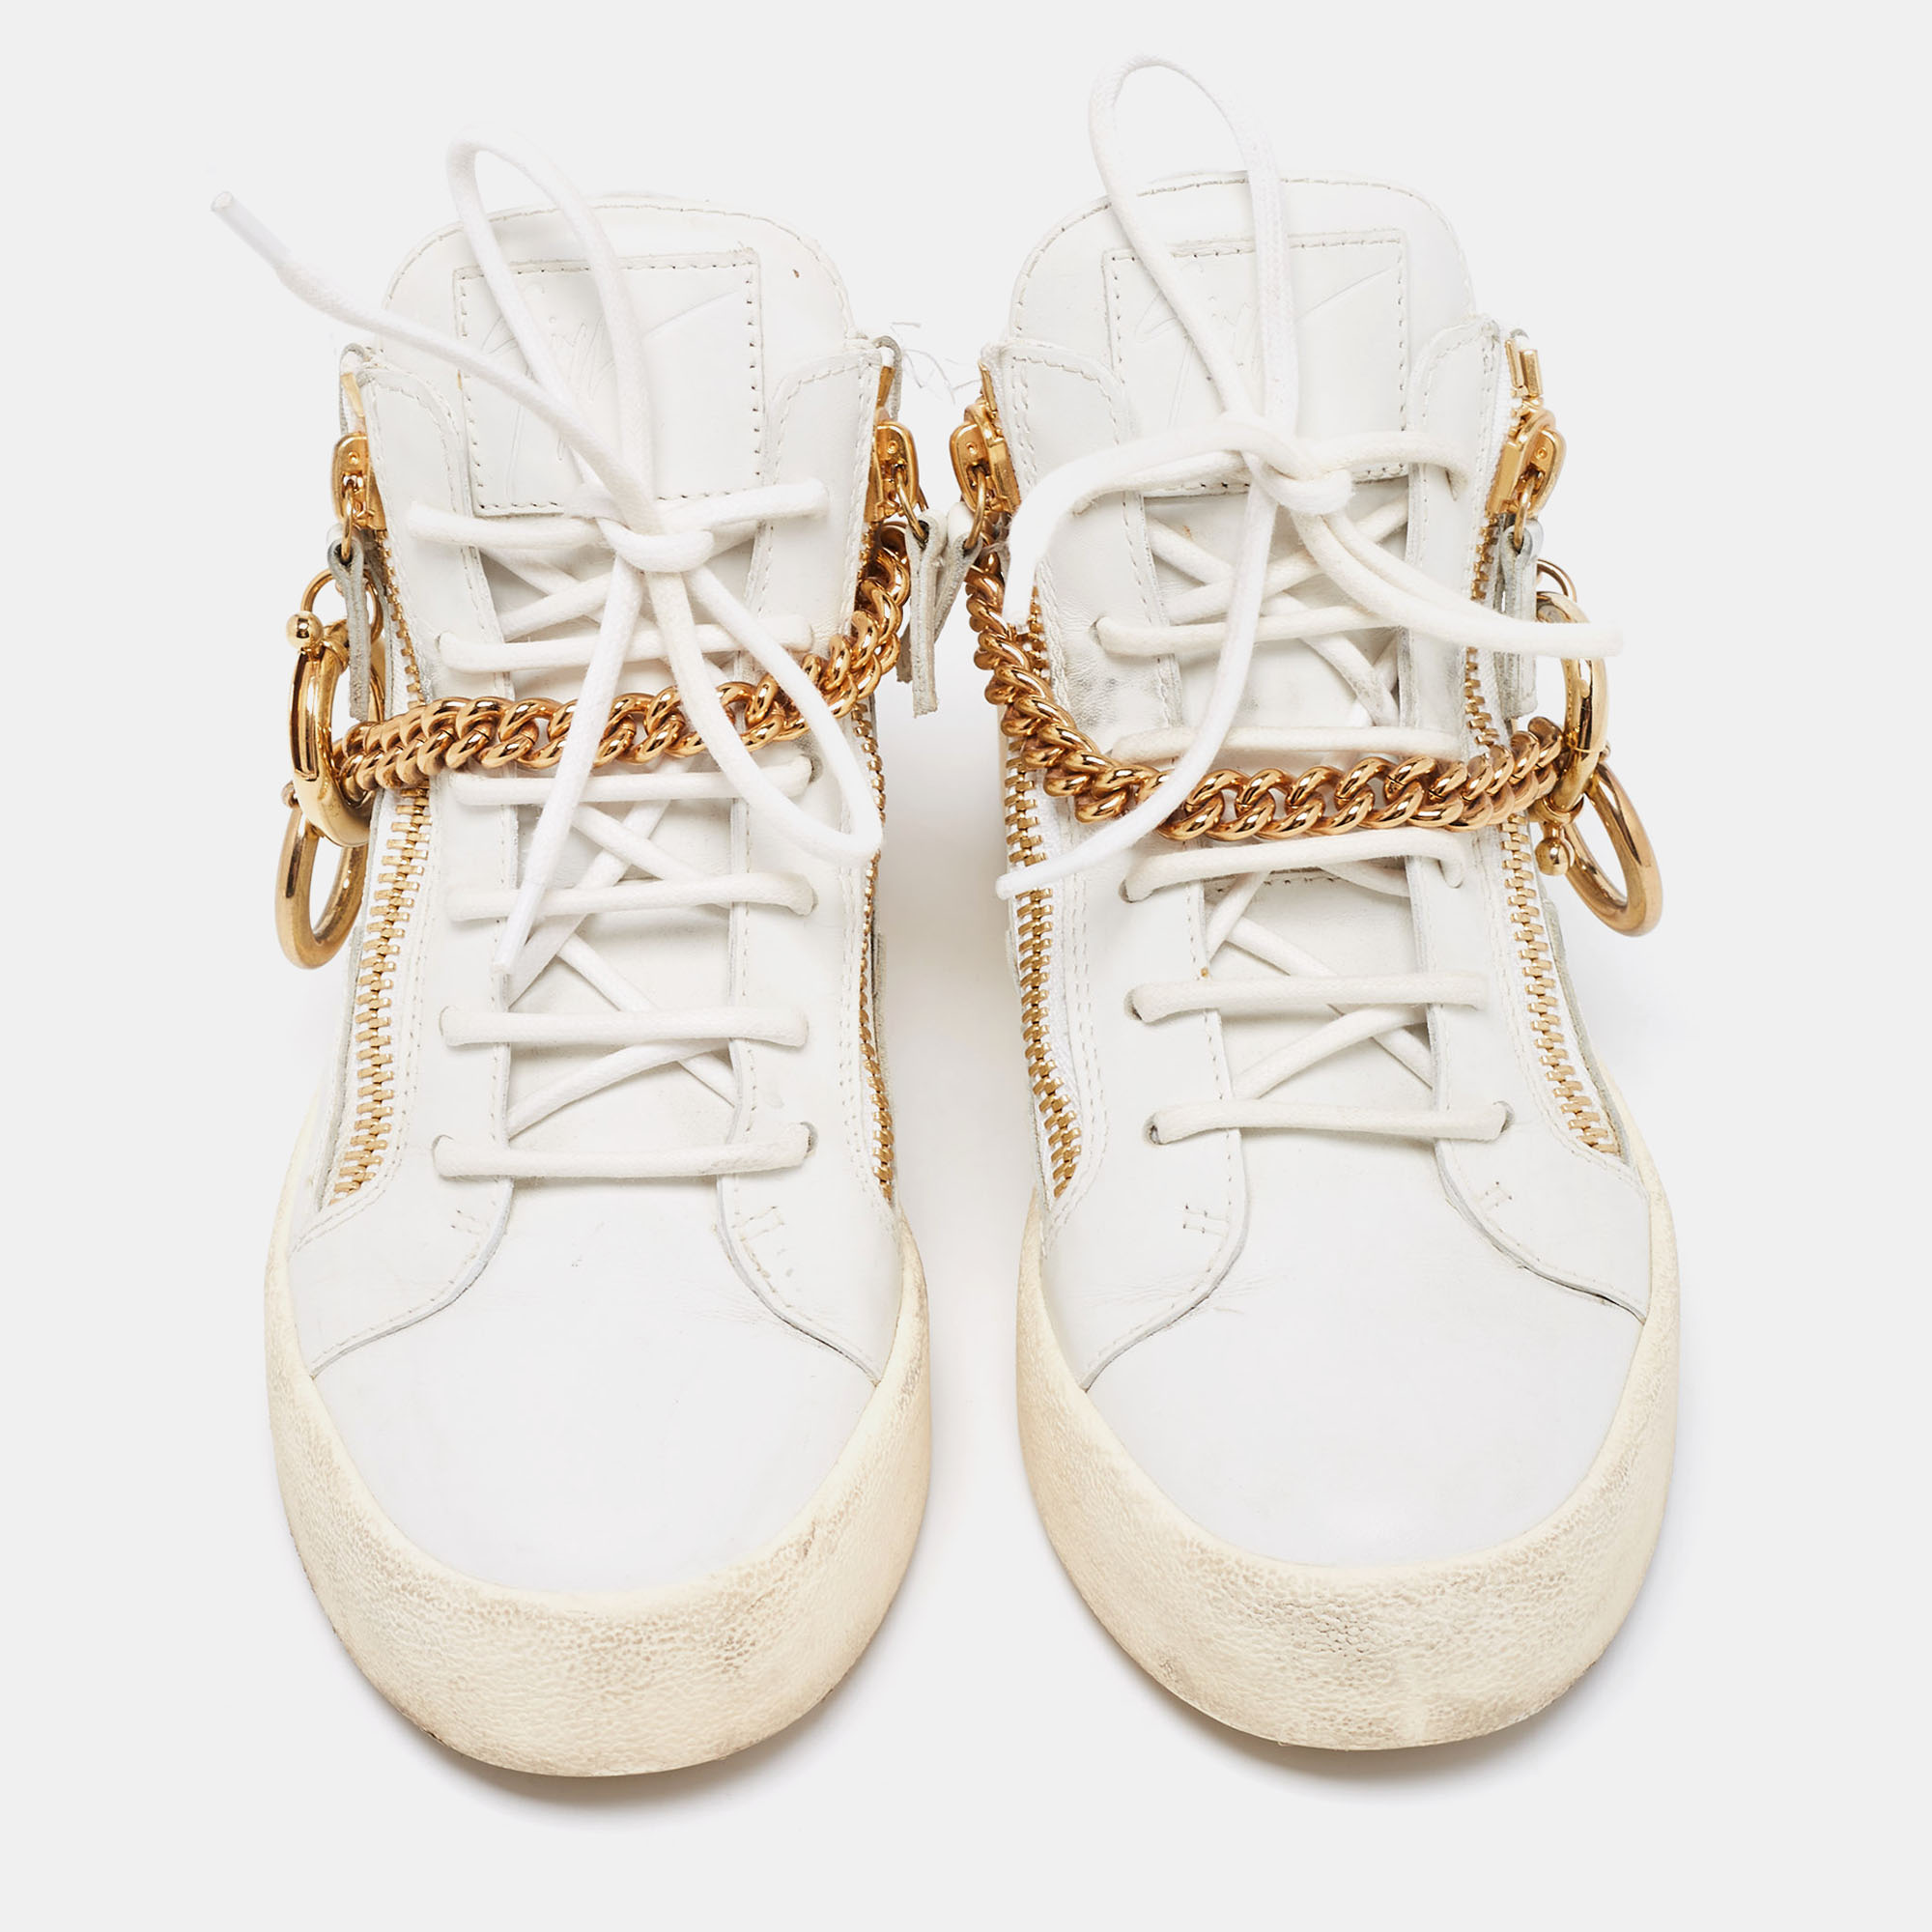 Giuseppe Zanotti White Leather Chain High Top Sneakers Size 37